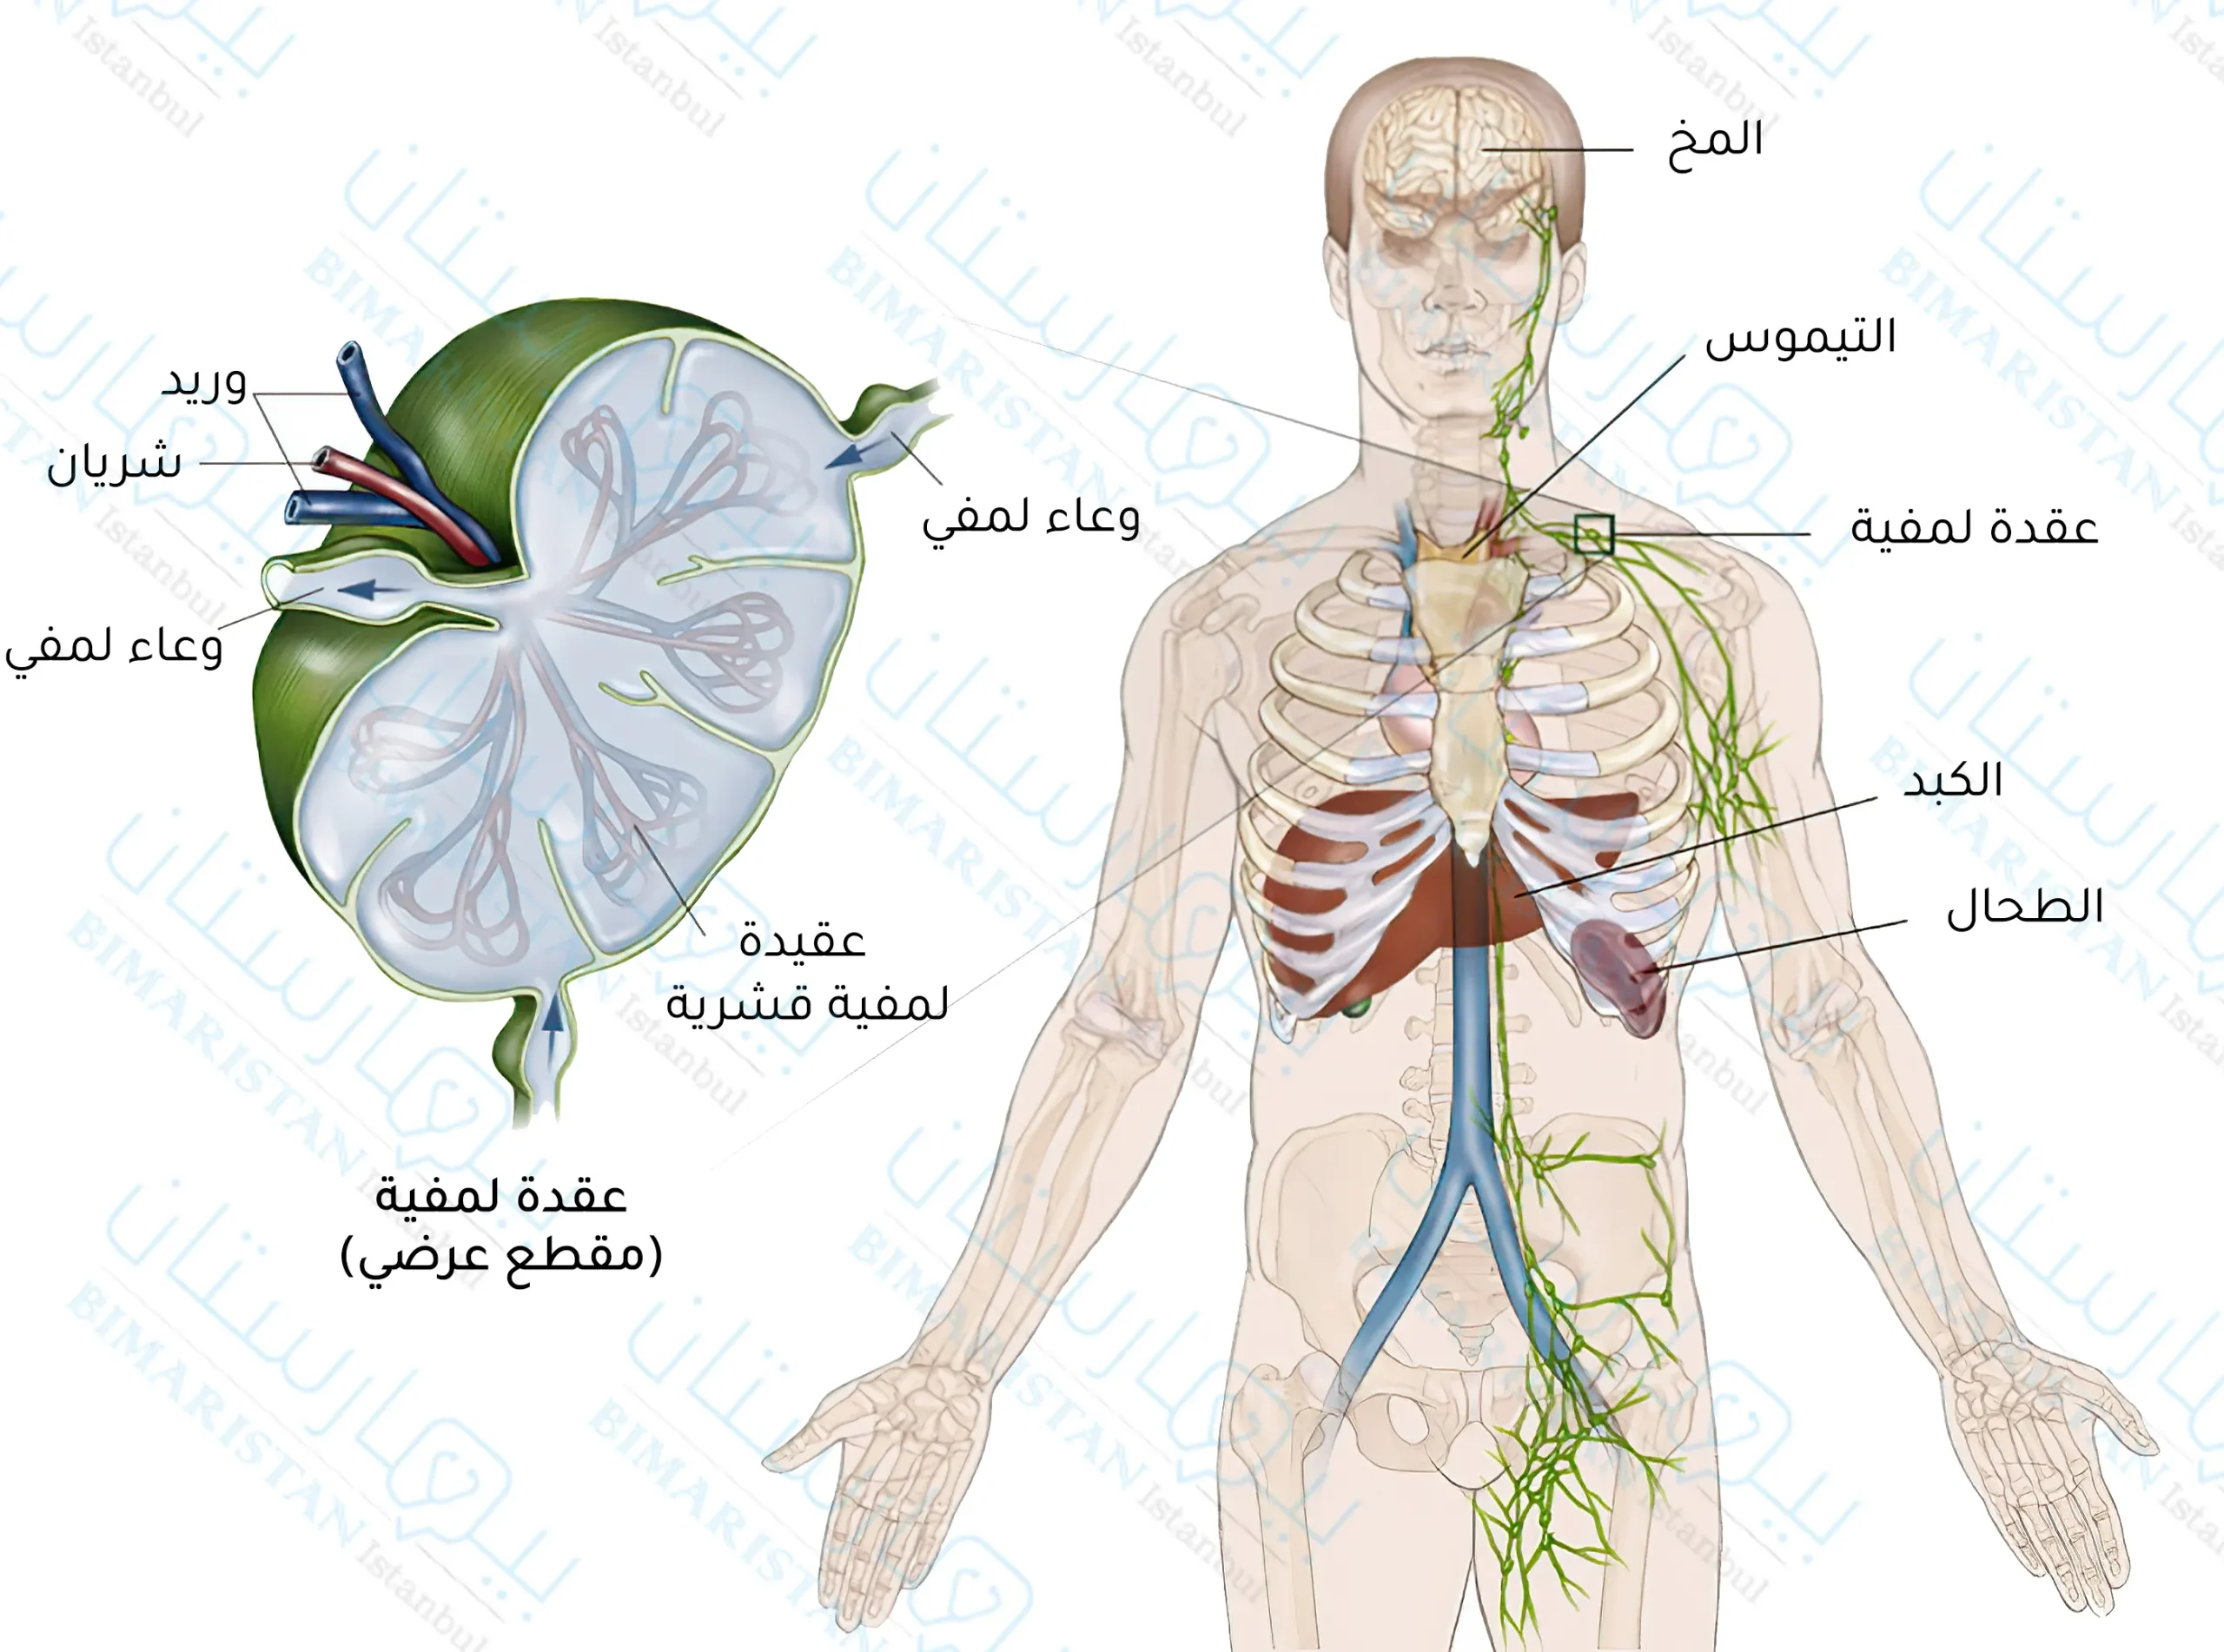 Picture of the lymphatic system in the human body and a section of the lymph node